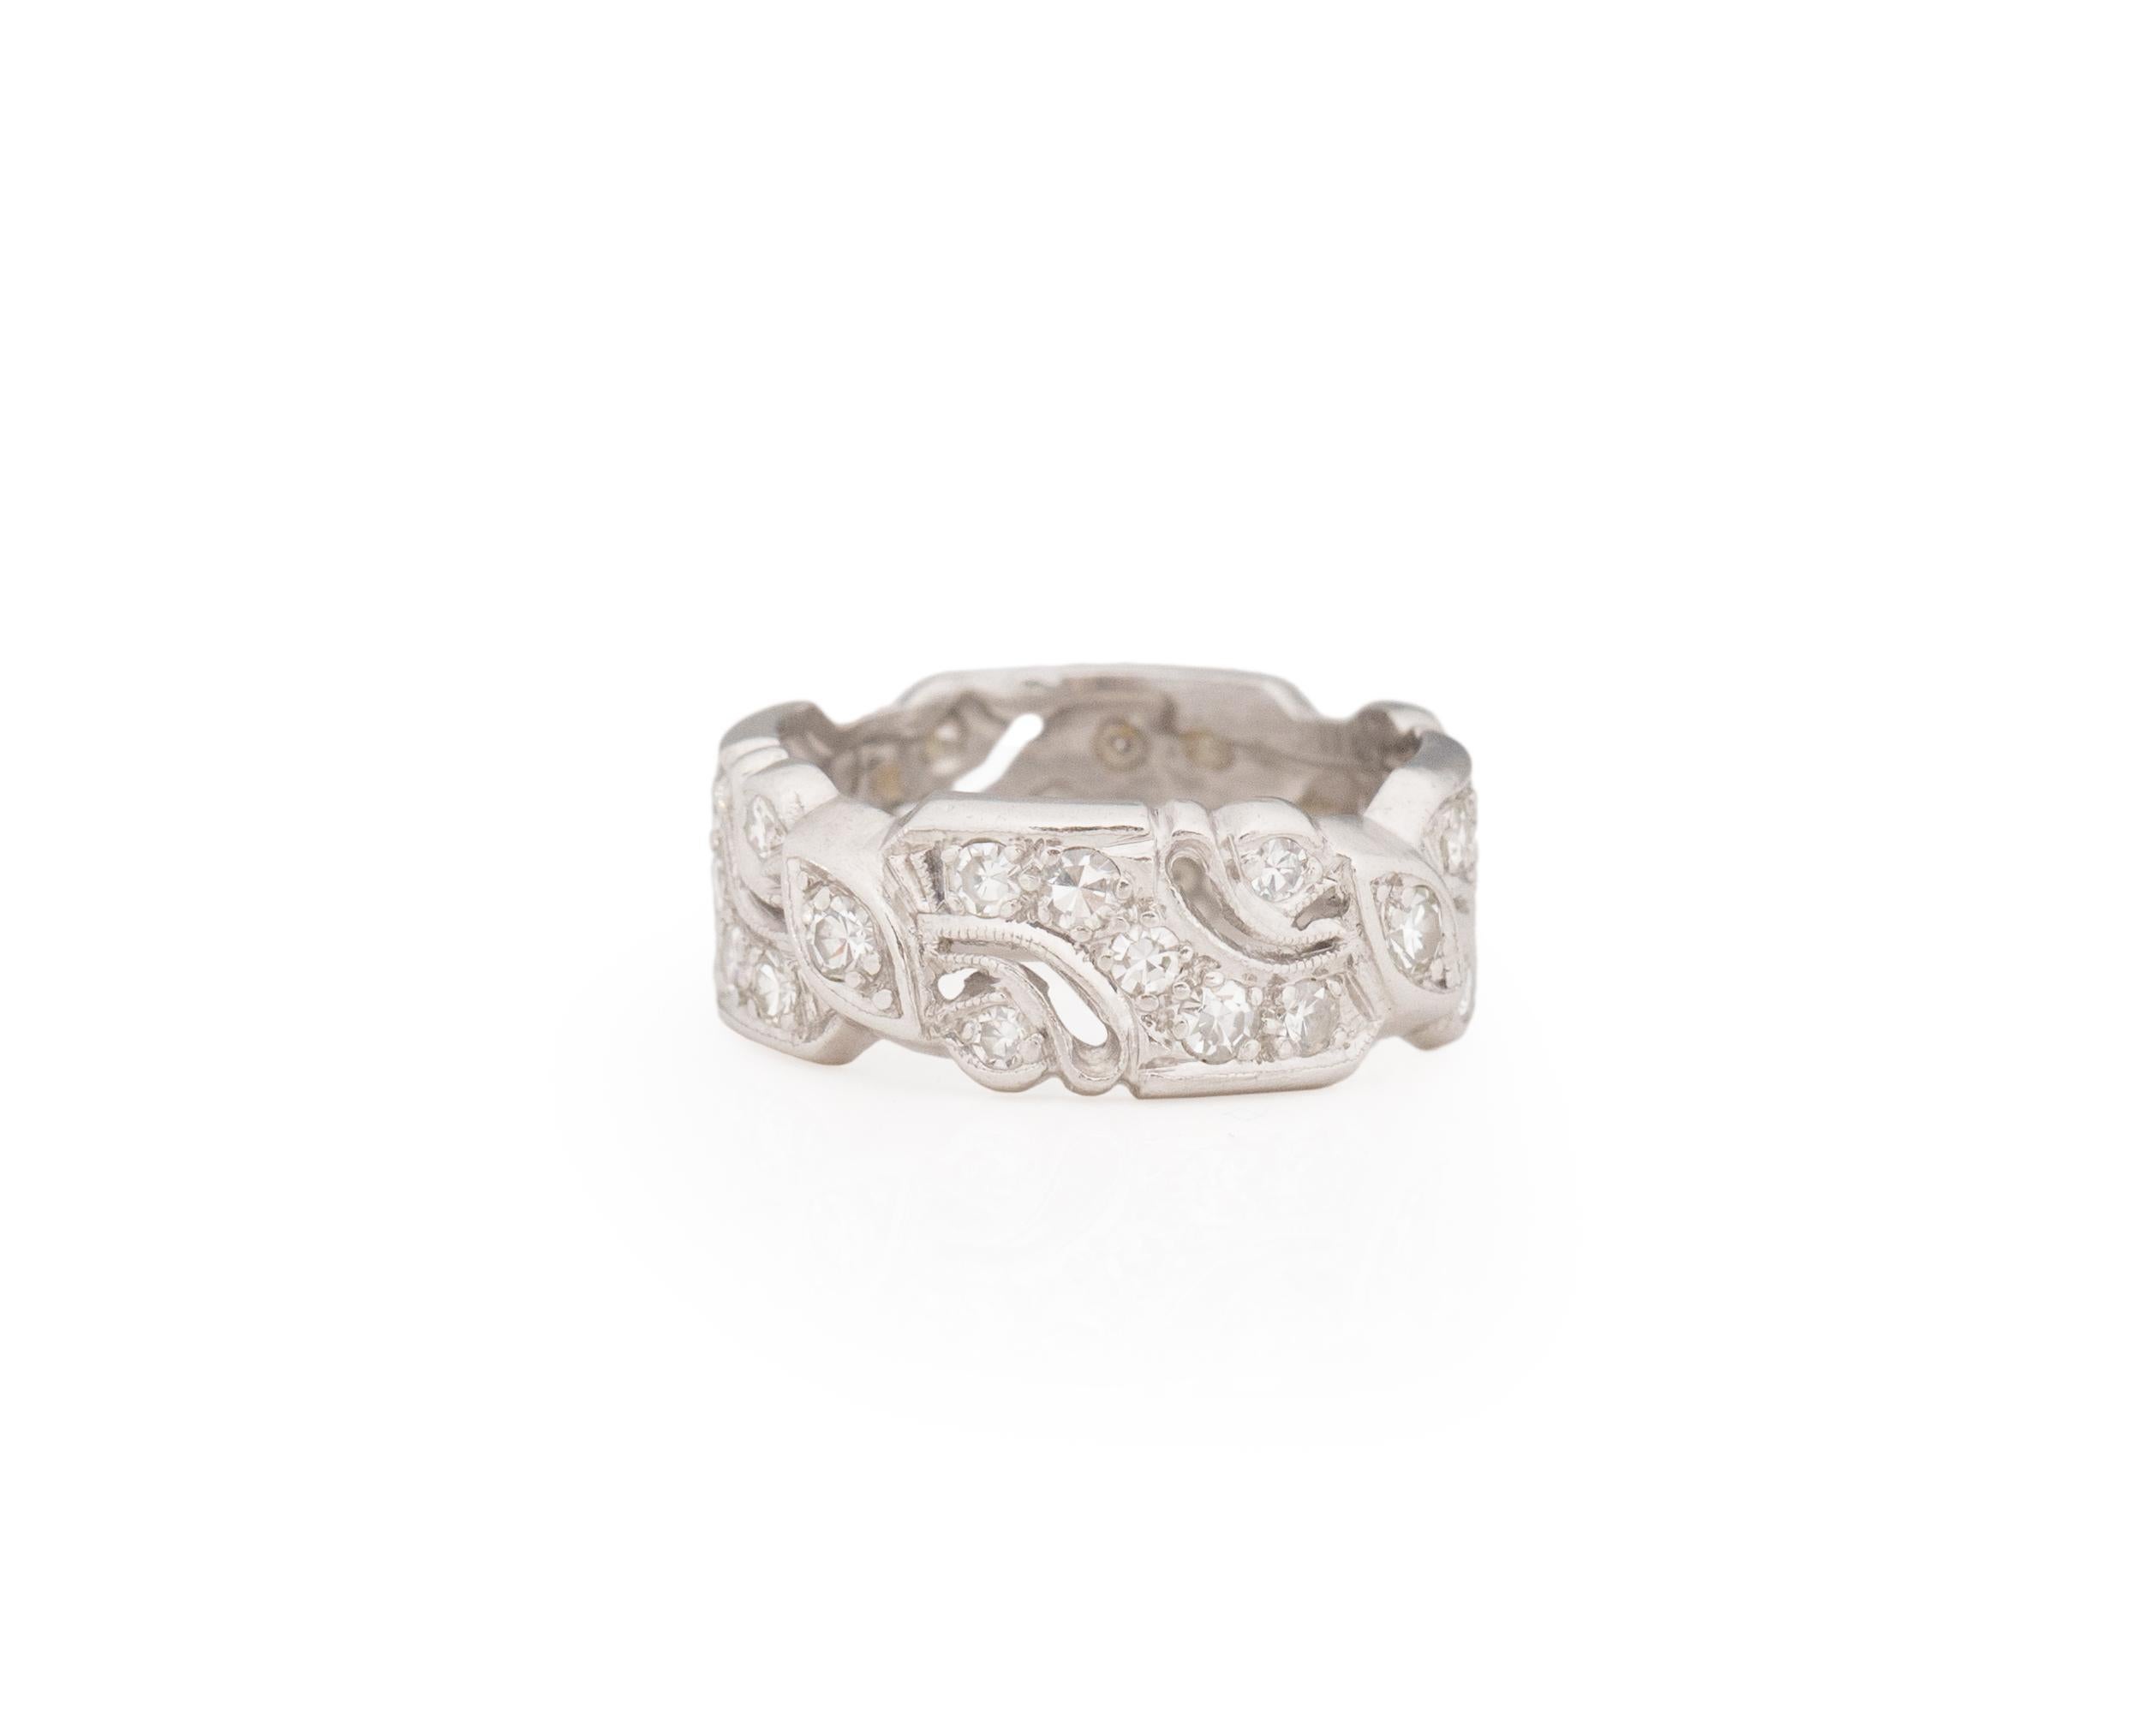 Ring Size: 5
Metal Type: Platinum [Hallmarked, and Tested]
Weight: 6.0 grams

Diamond Details:
Weight: .50ct
Cut: Old European brilliant
Color: G
Clarity: VS

Finger to Top of Stone Measurement: 1mm
Band Width/Thickness: 7mm
Condition: Excellent